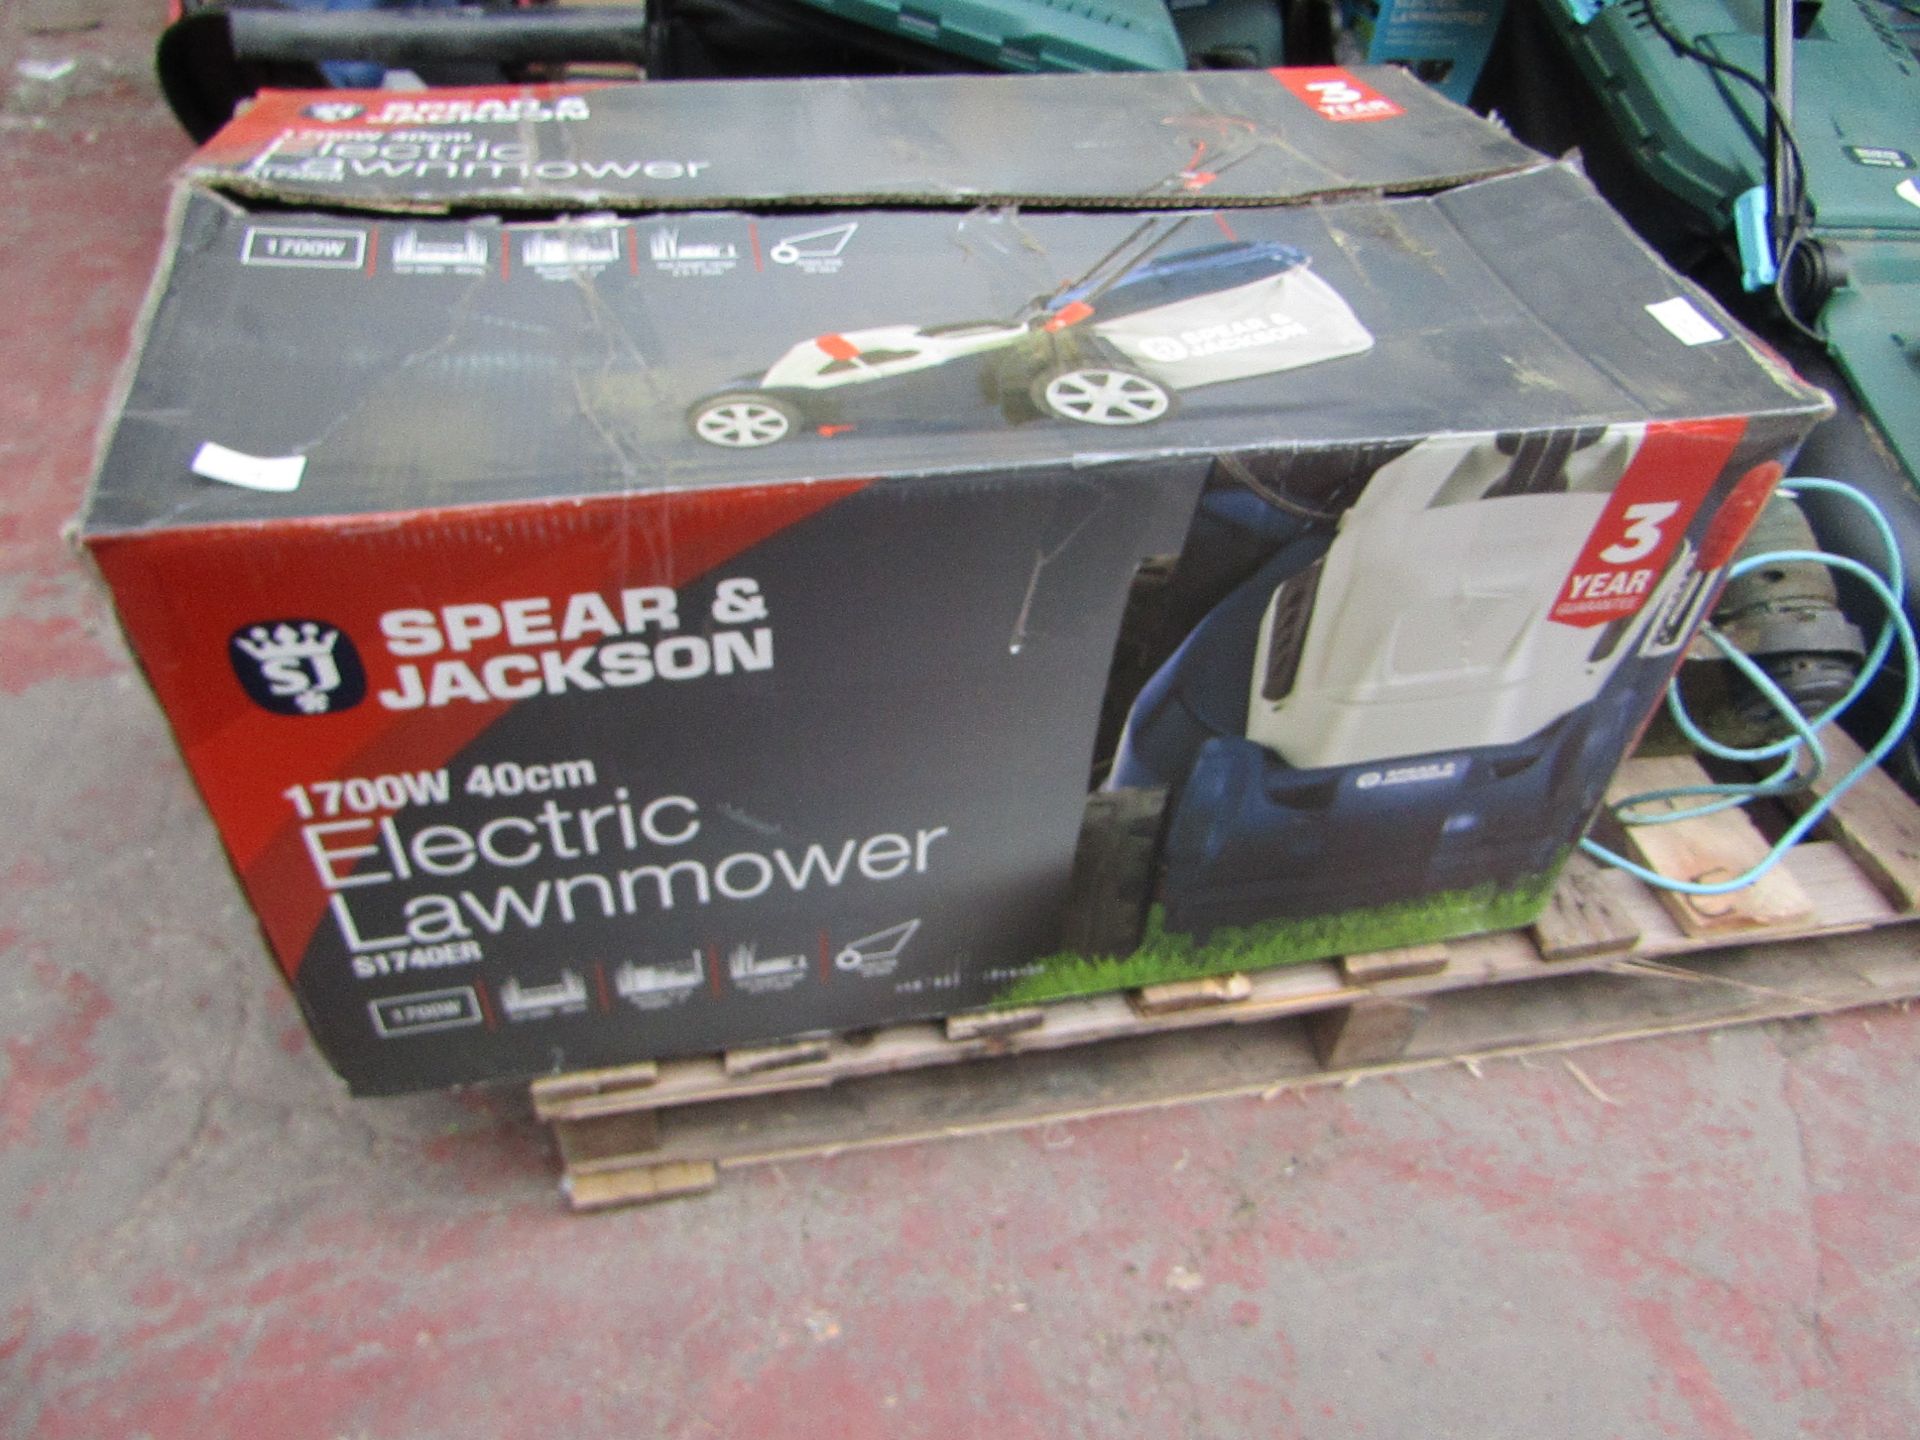 Spear and Jackson 1700w Lawn Mower, tested working and boxed